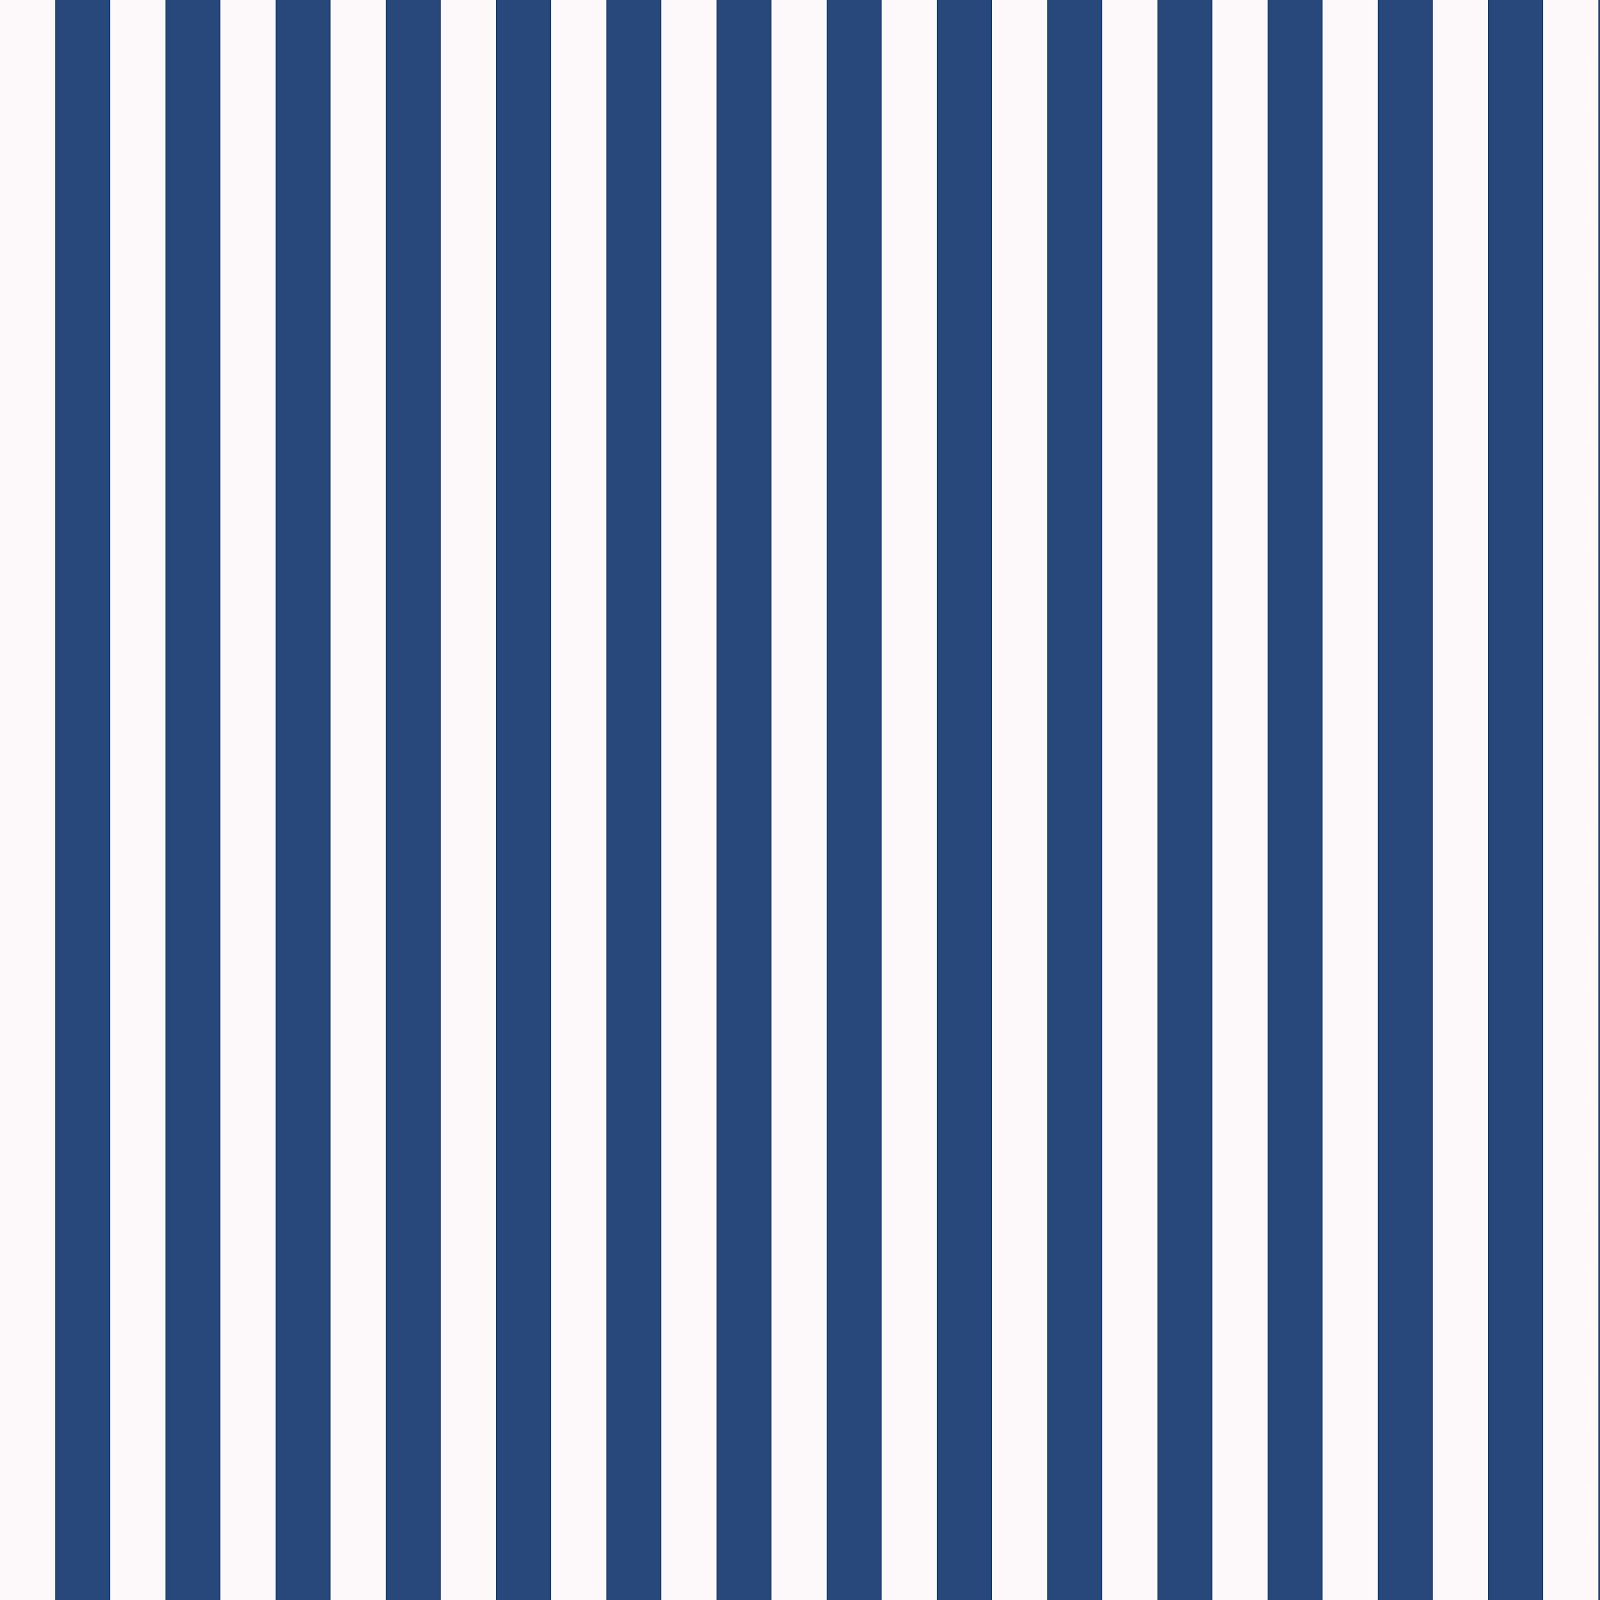 [50+] Navy and White Striped Wallpapers | WallpaperSafari